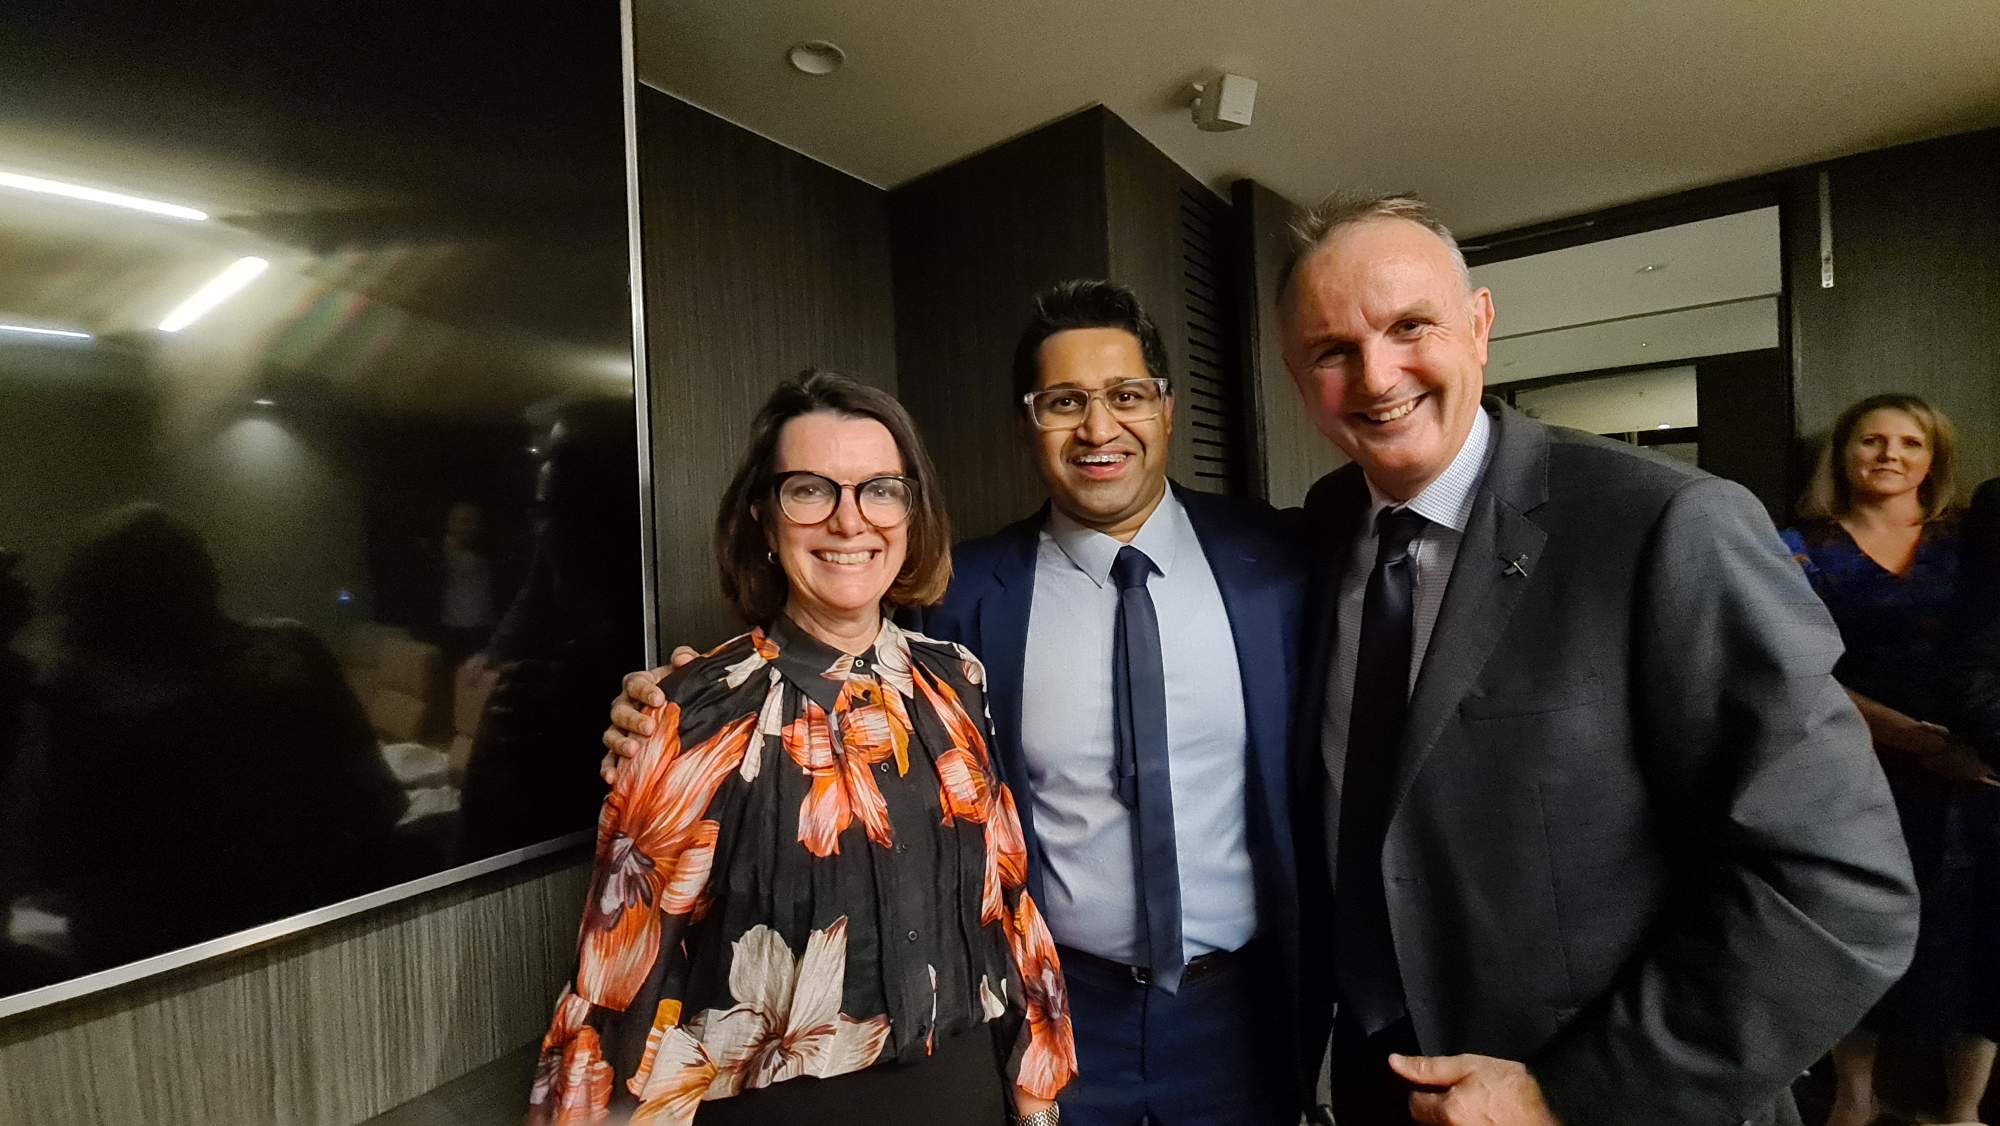 Taher Ali and Brenden Brien engage with Minister Ruston at an industry dinner for the employment and training industry